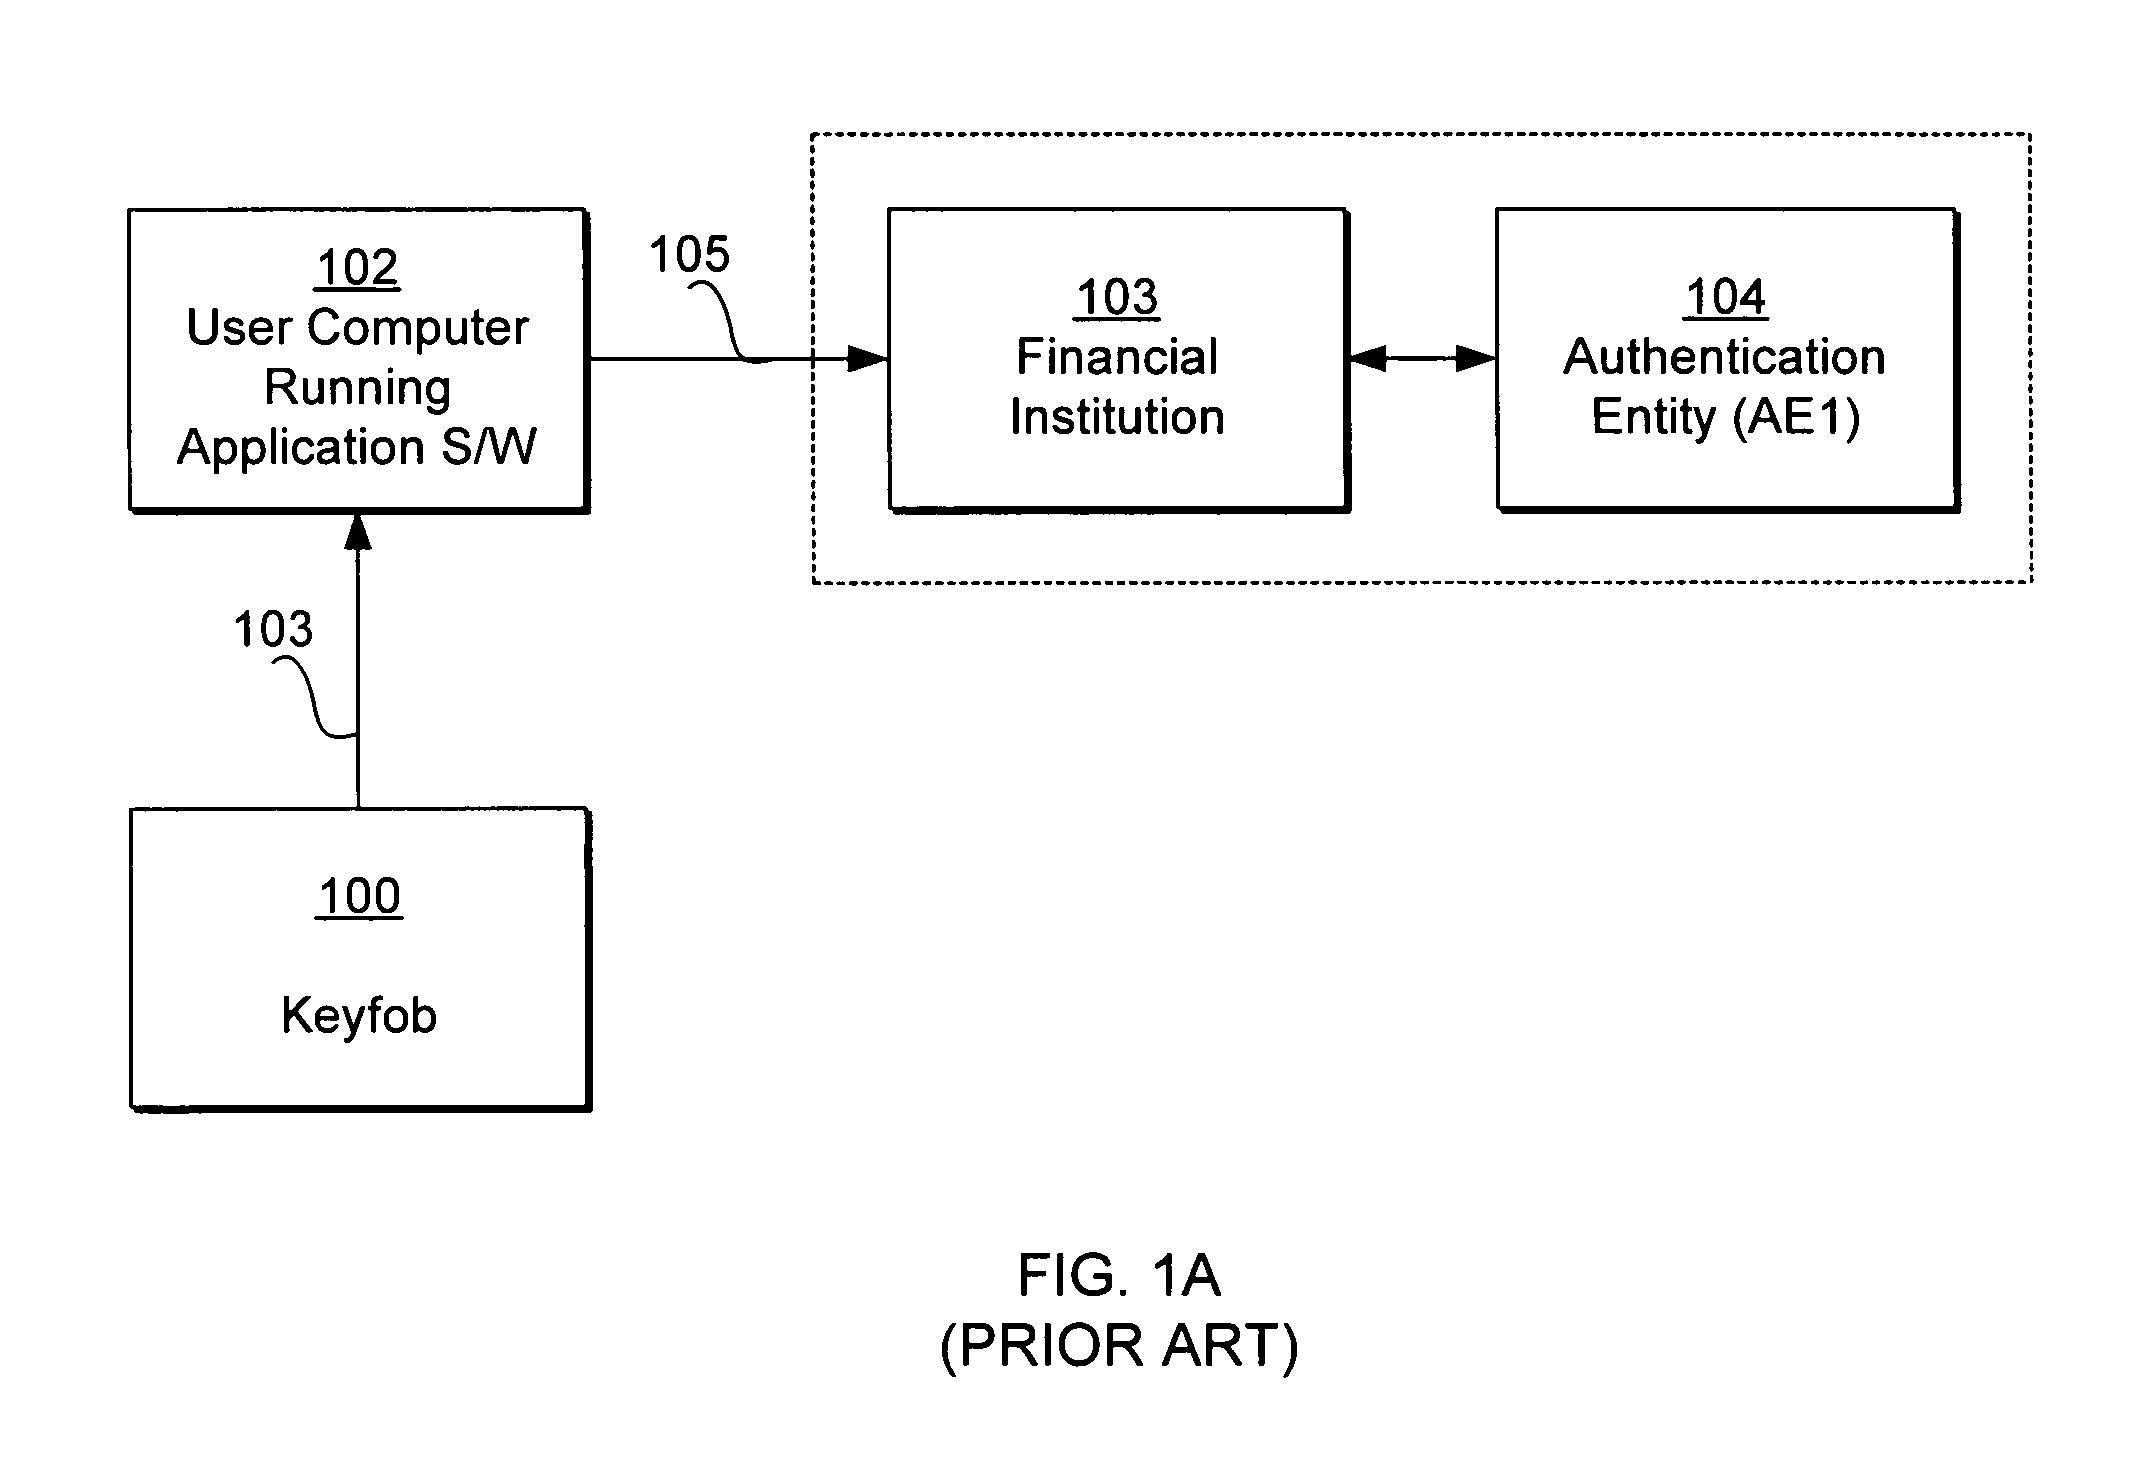 Keyfob for use with multiple authentication entities